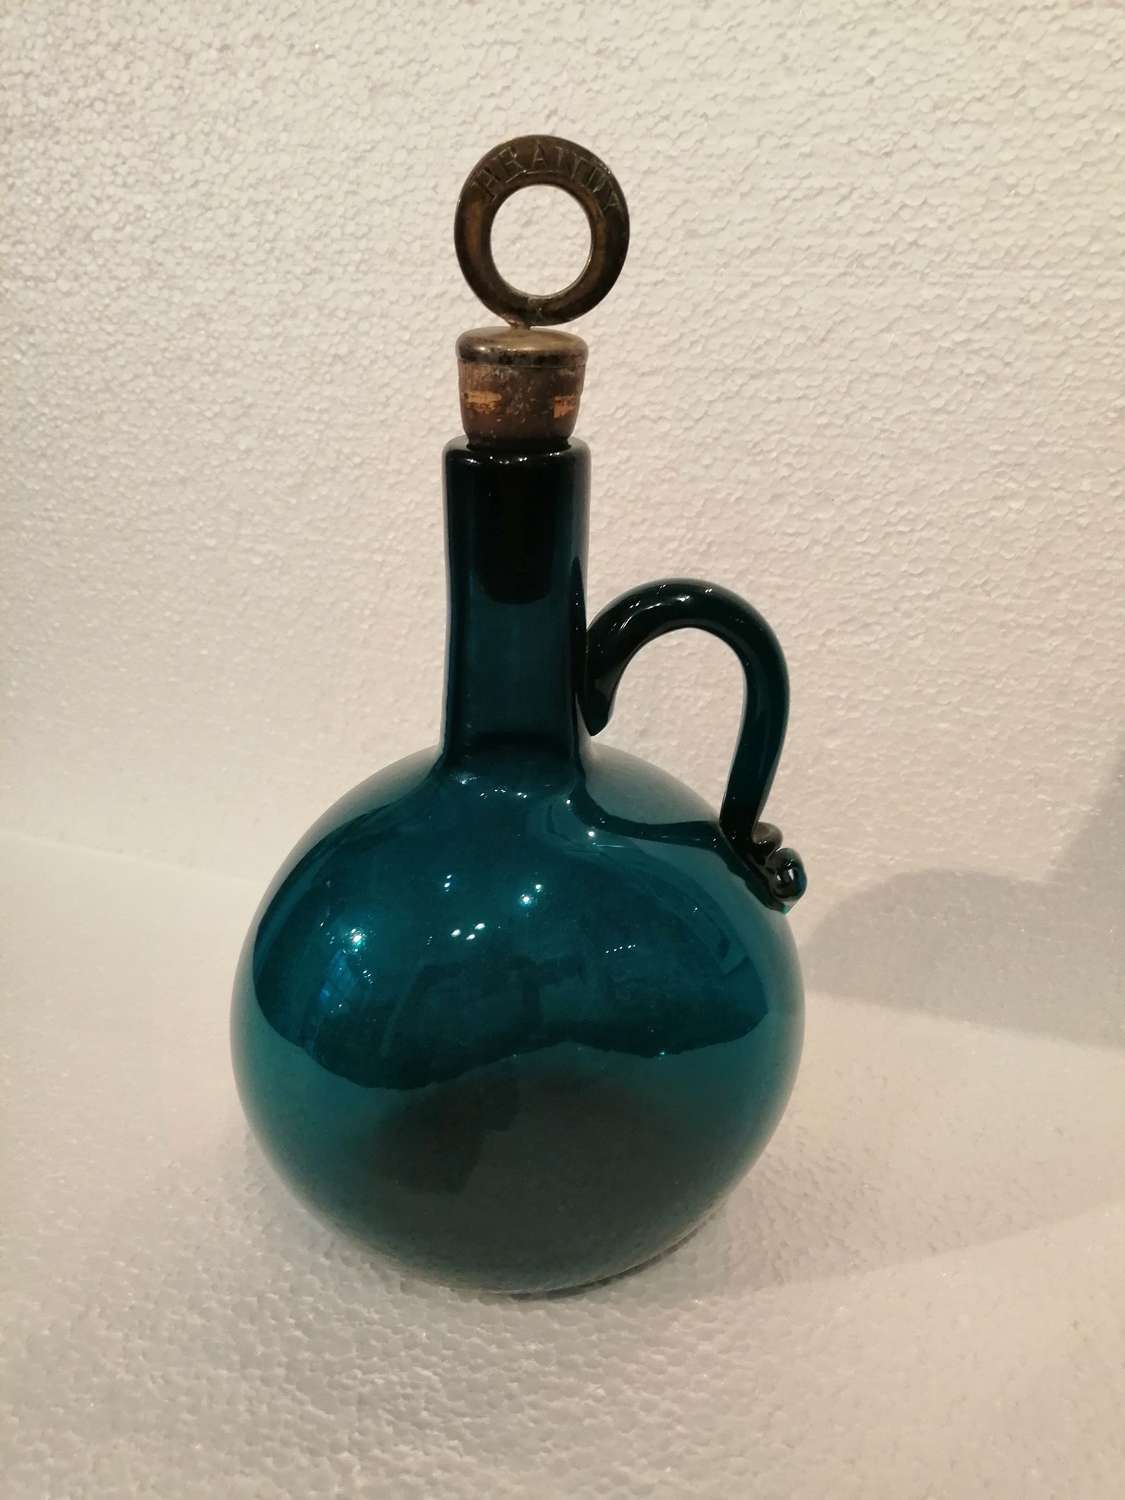 A lovely early 19th century peacock blue flagon/decanter